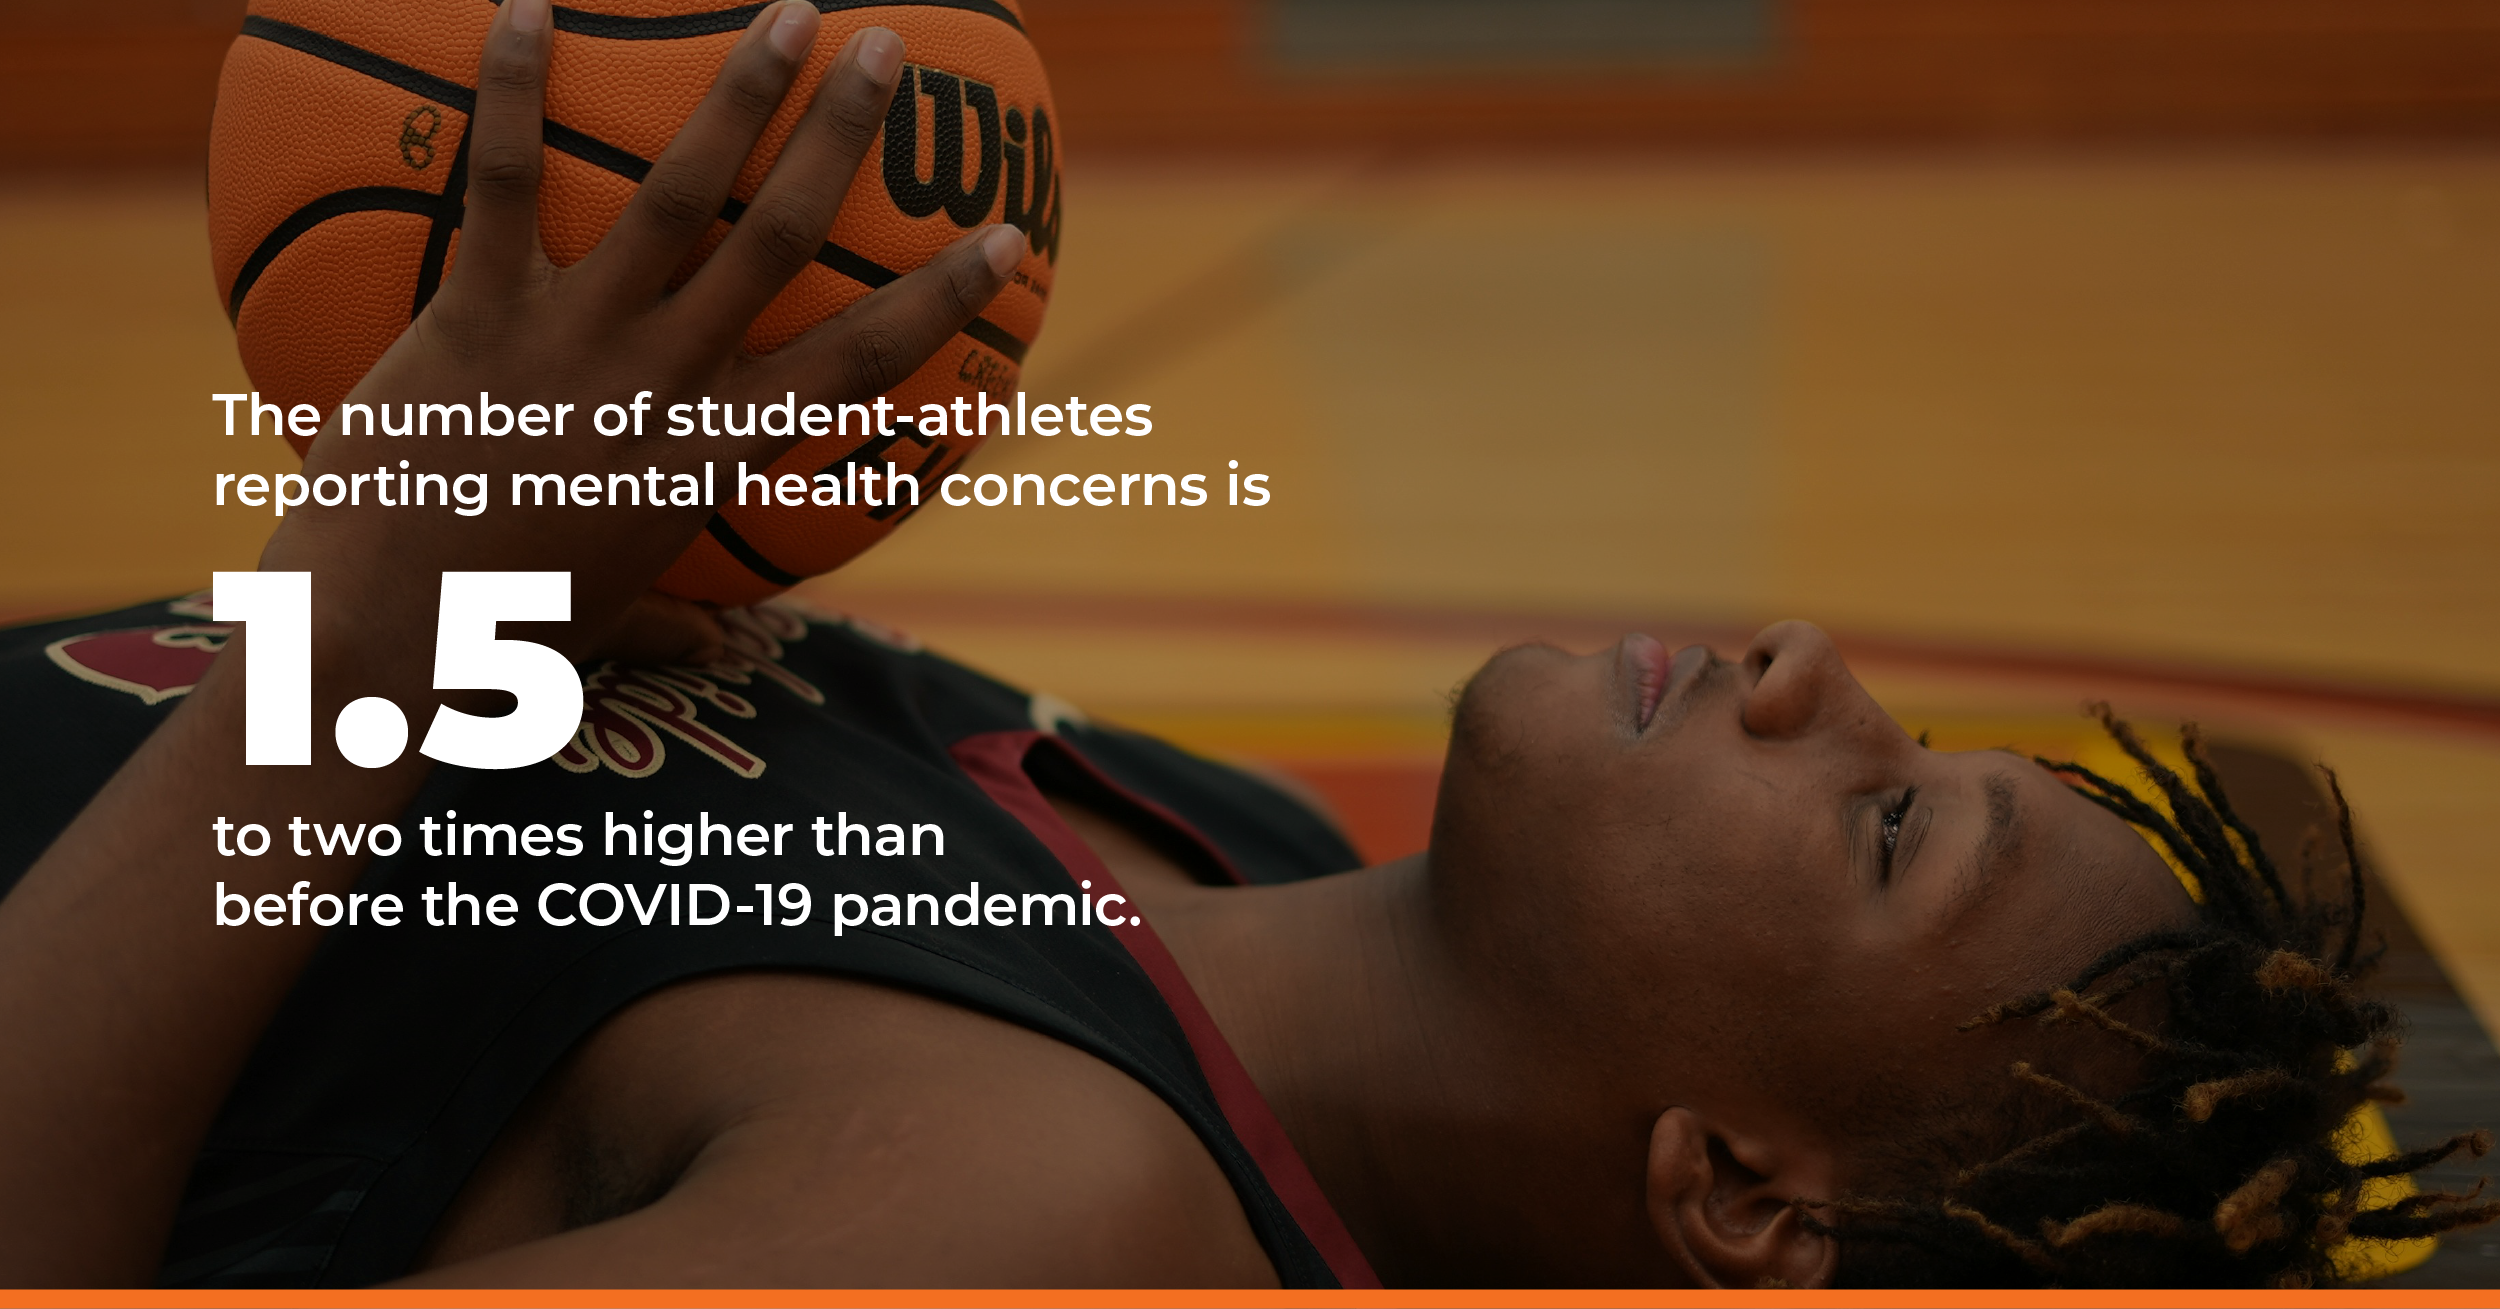 The number of student athletes reporting mental health concerns in 1.5 to two times higher than before the Covid-19 pandemic. Source: https://ncaaorg.s3.amazonaws.com/research/other/2020/2022RES_NCAA-SA-Well-BeingSurvey.pdf 